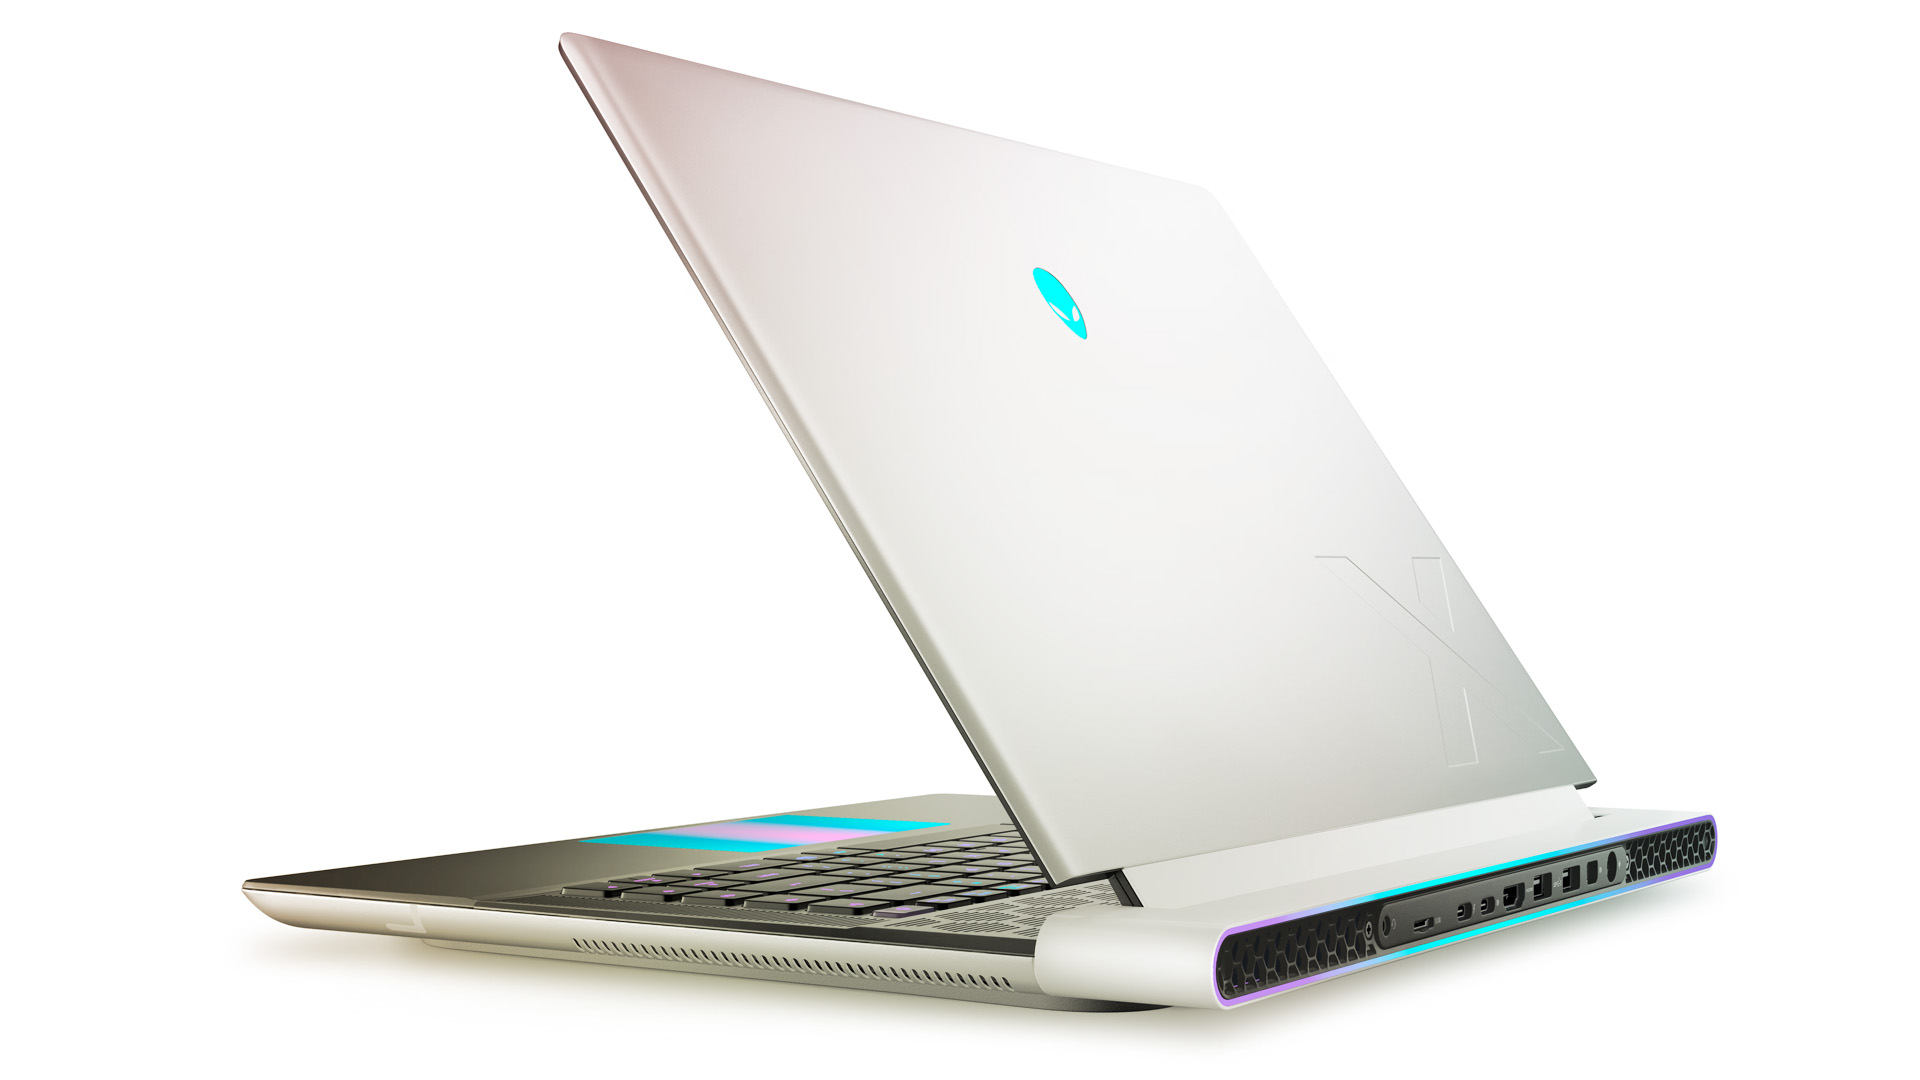  Alienware x16: Design, Features, Performance, And More!  